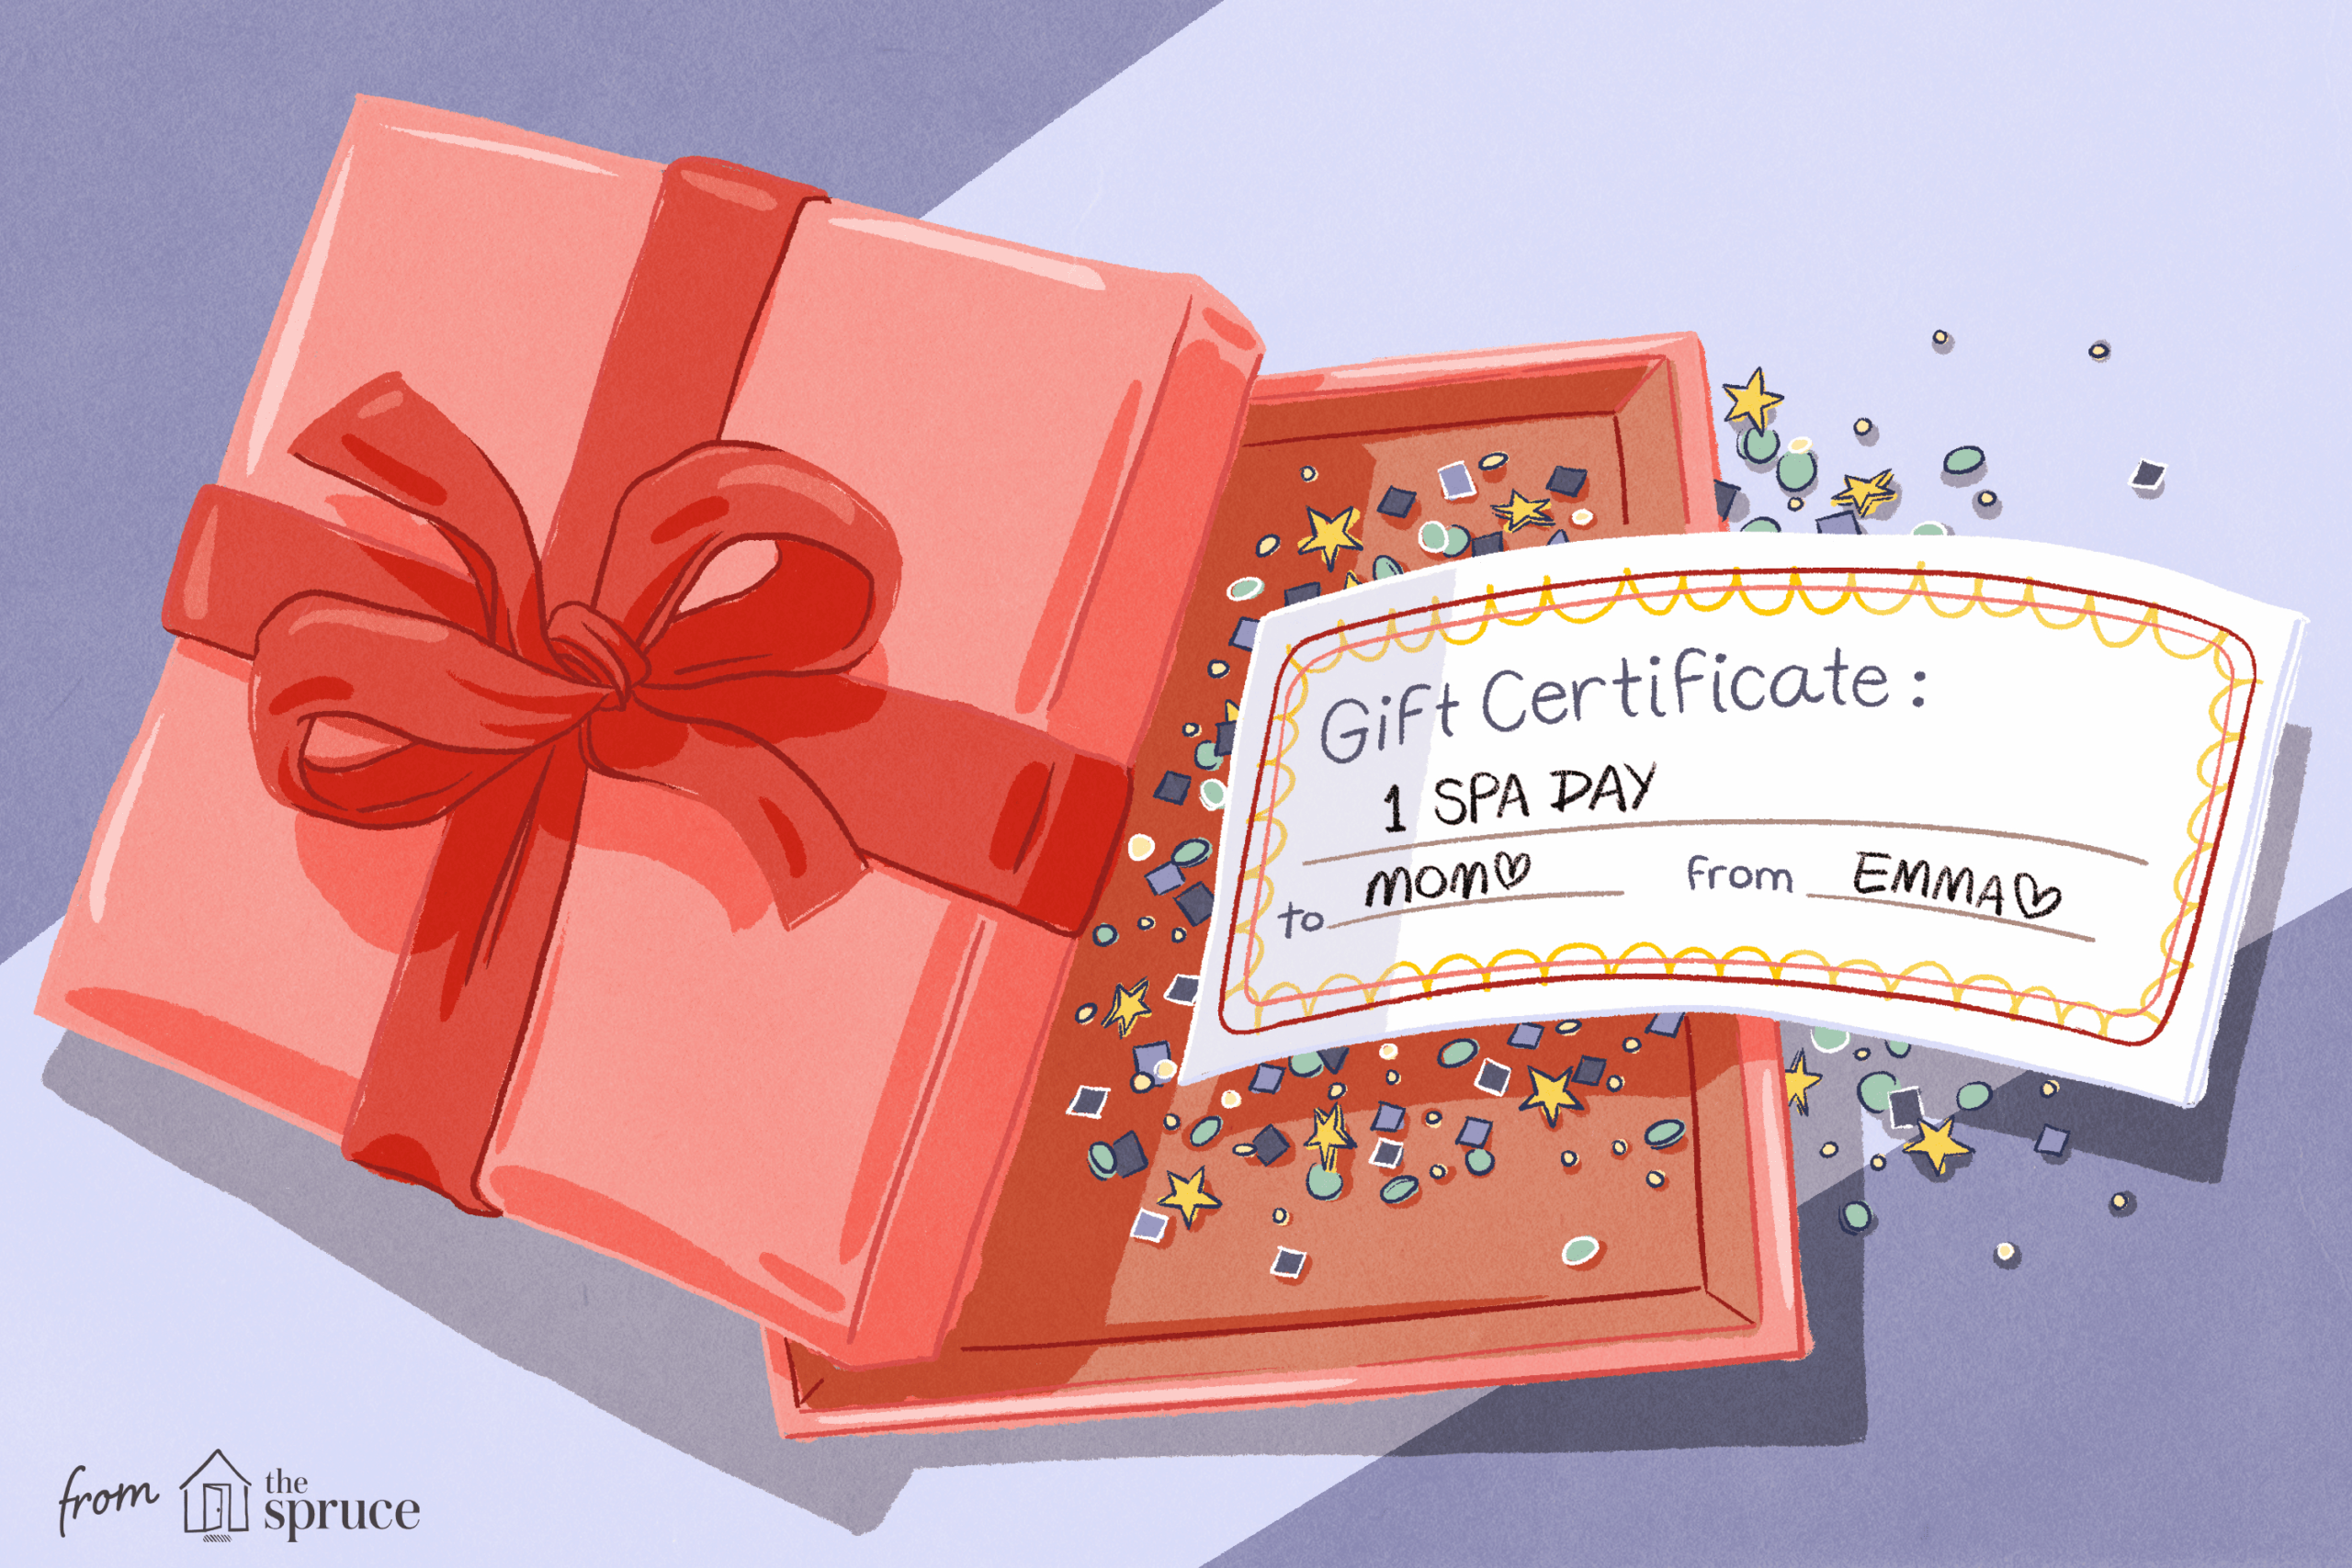 Free Gift Certificate Templates You Can Customize For Massage Gift Certificate Template Free Download